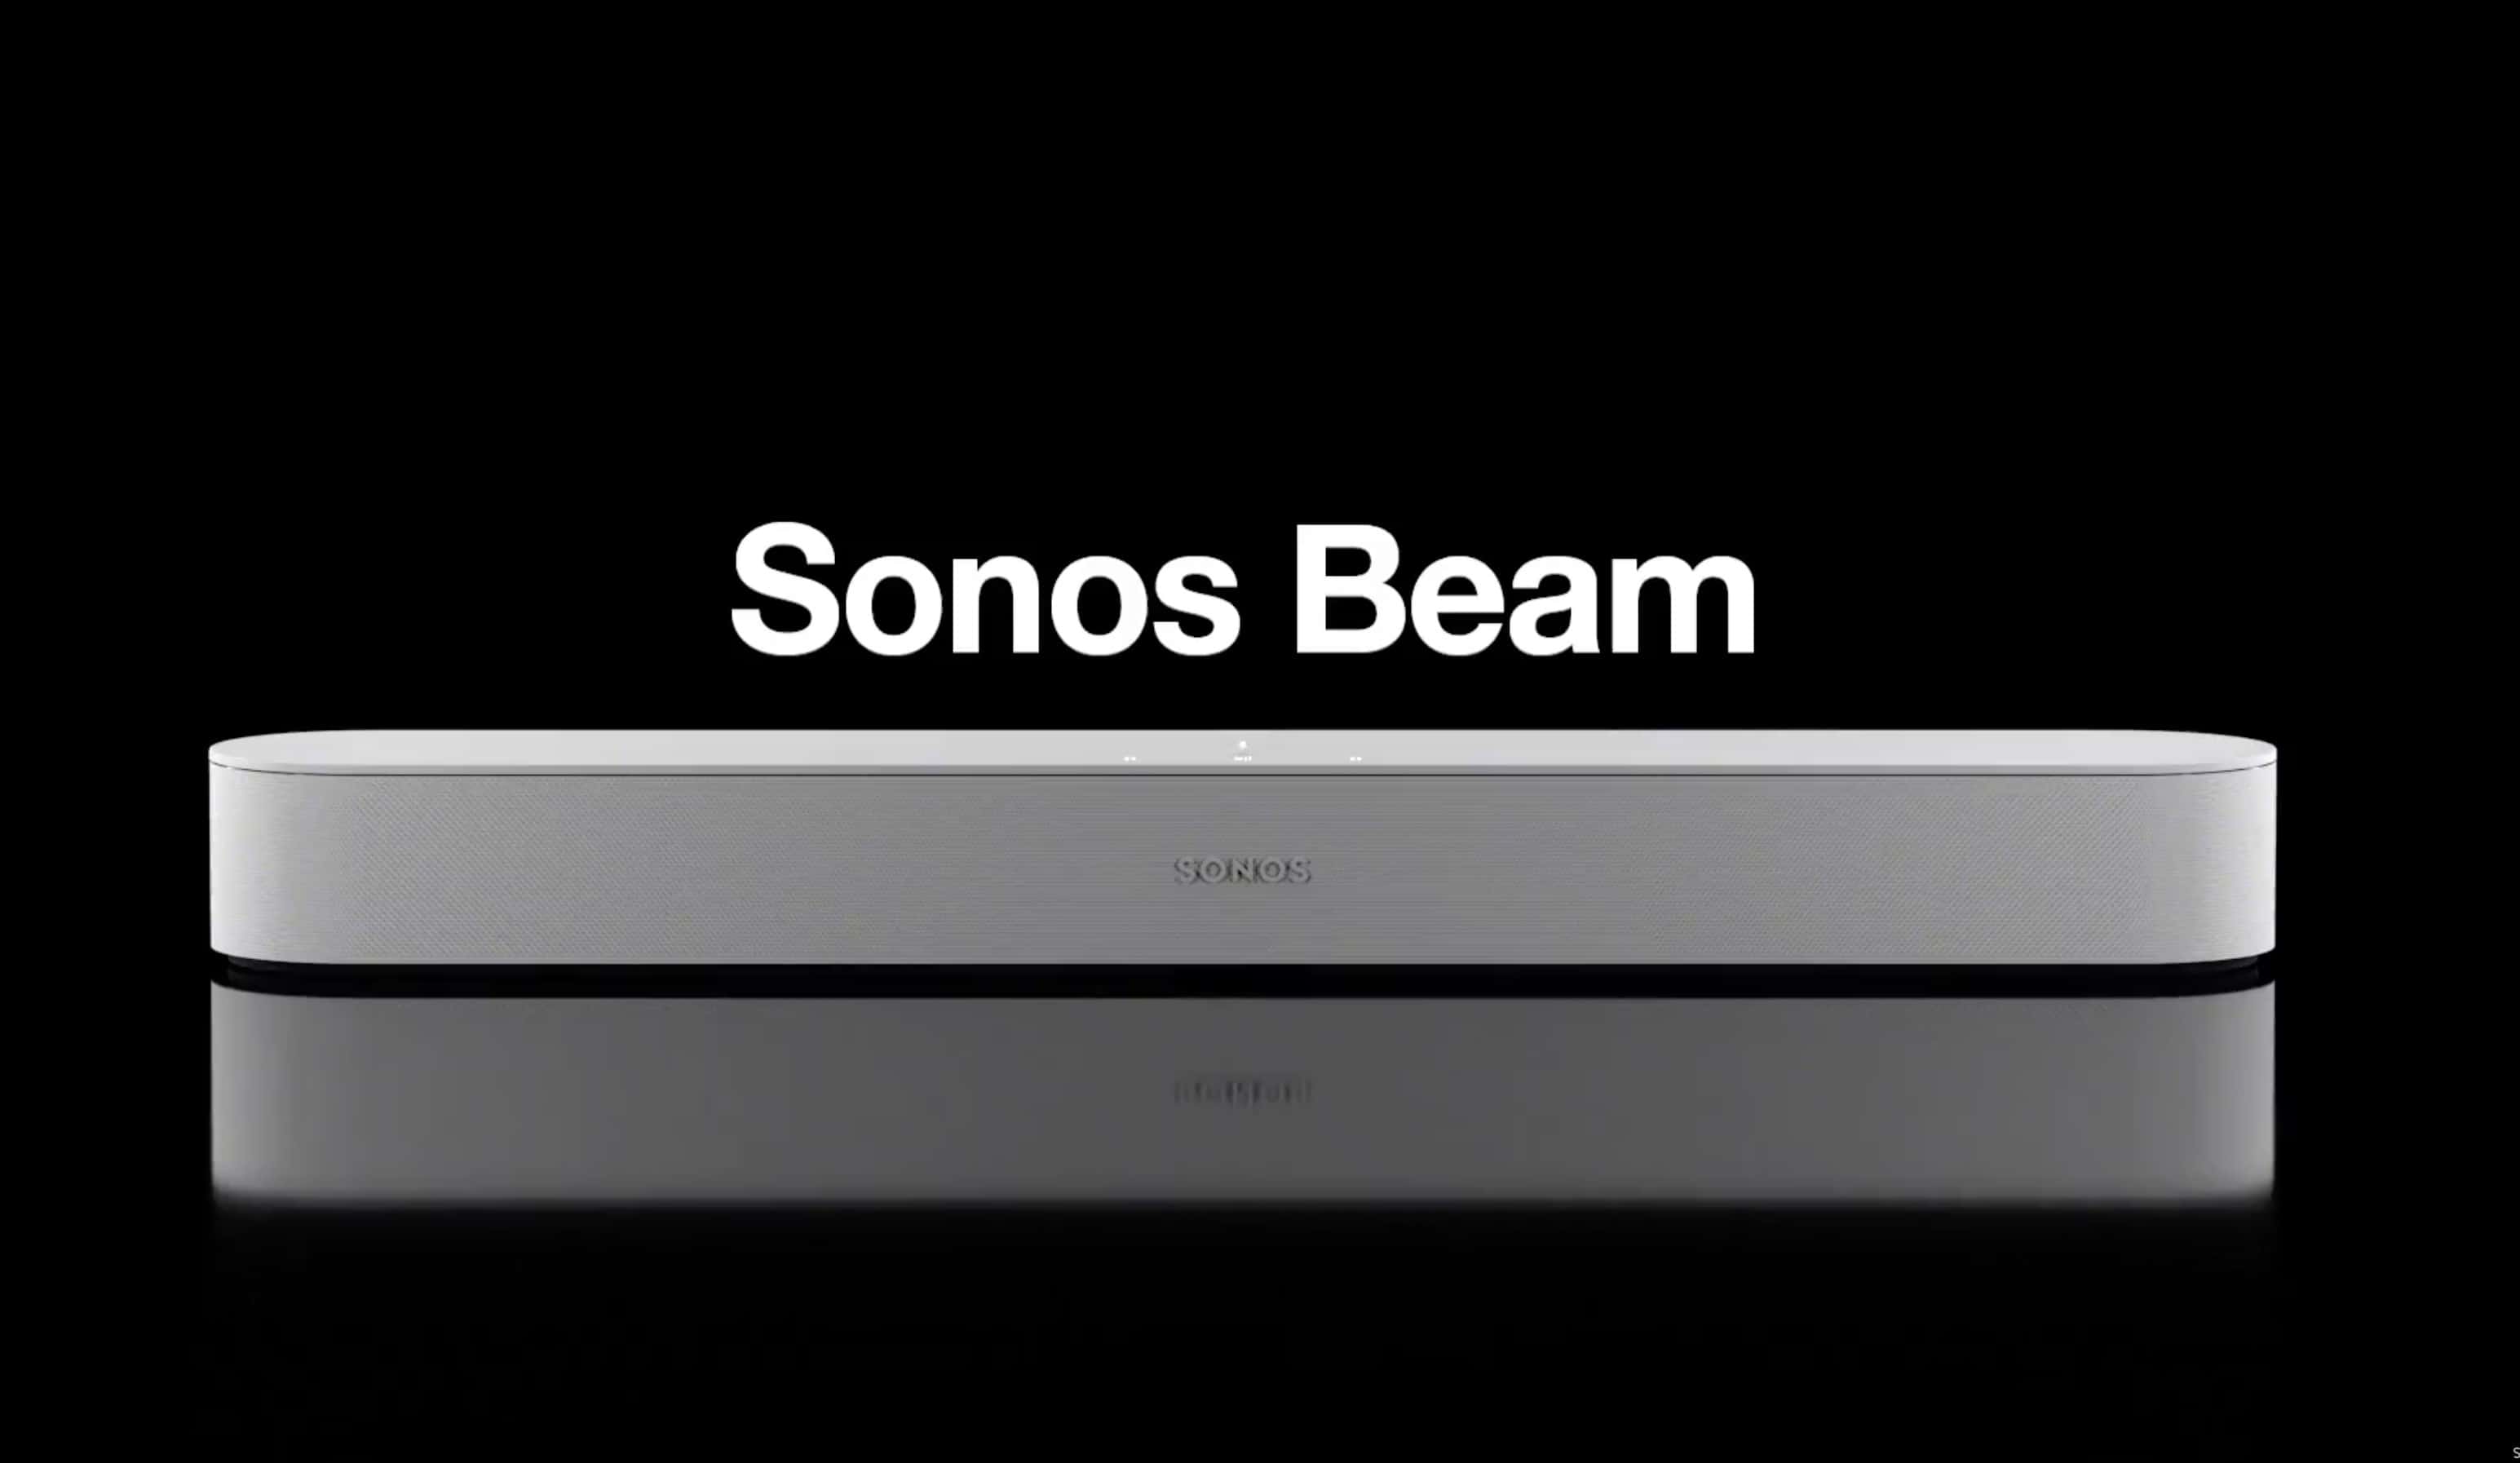 masculino Residencia Garganta Sonos busts out new Beam sound bar, plus AirPlay 2 support | Cult of Mac